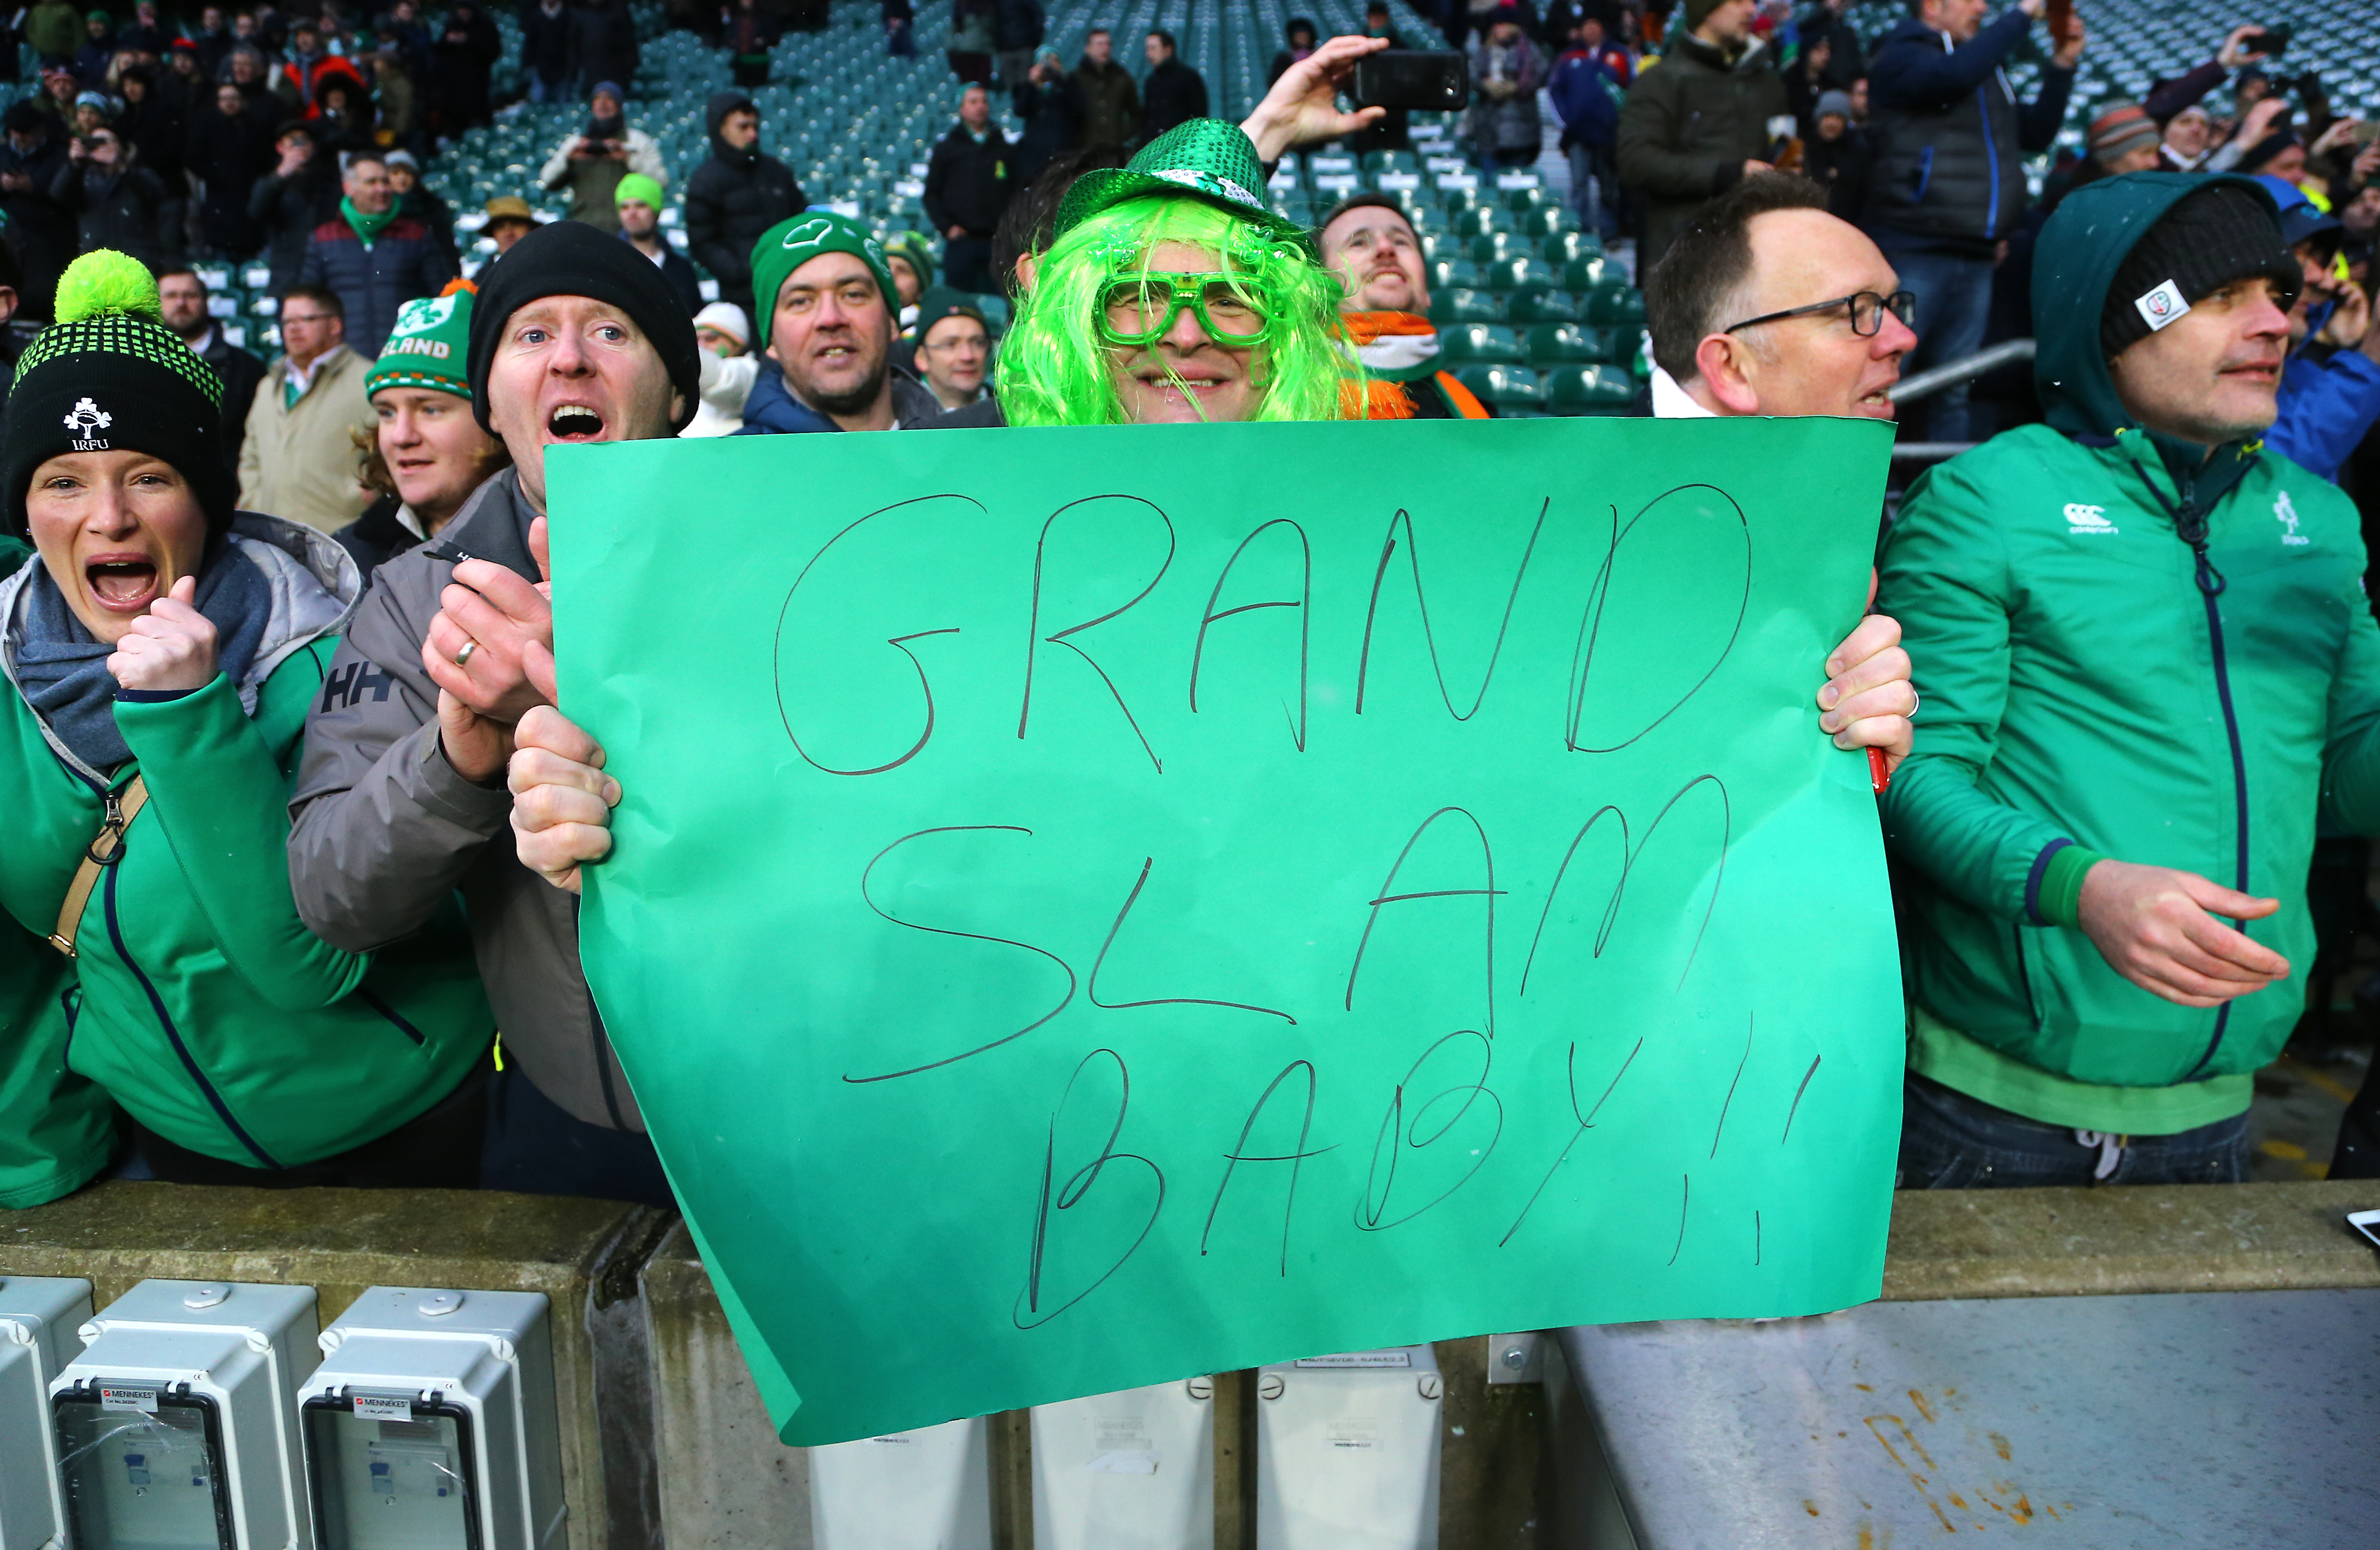 Fans hold up a sign celebrating Ireland's victory during the NatWest 6 Nations match at Twickenham Stadium, London